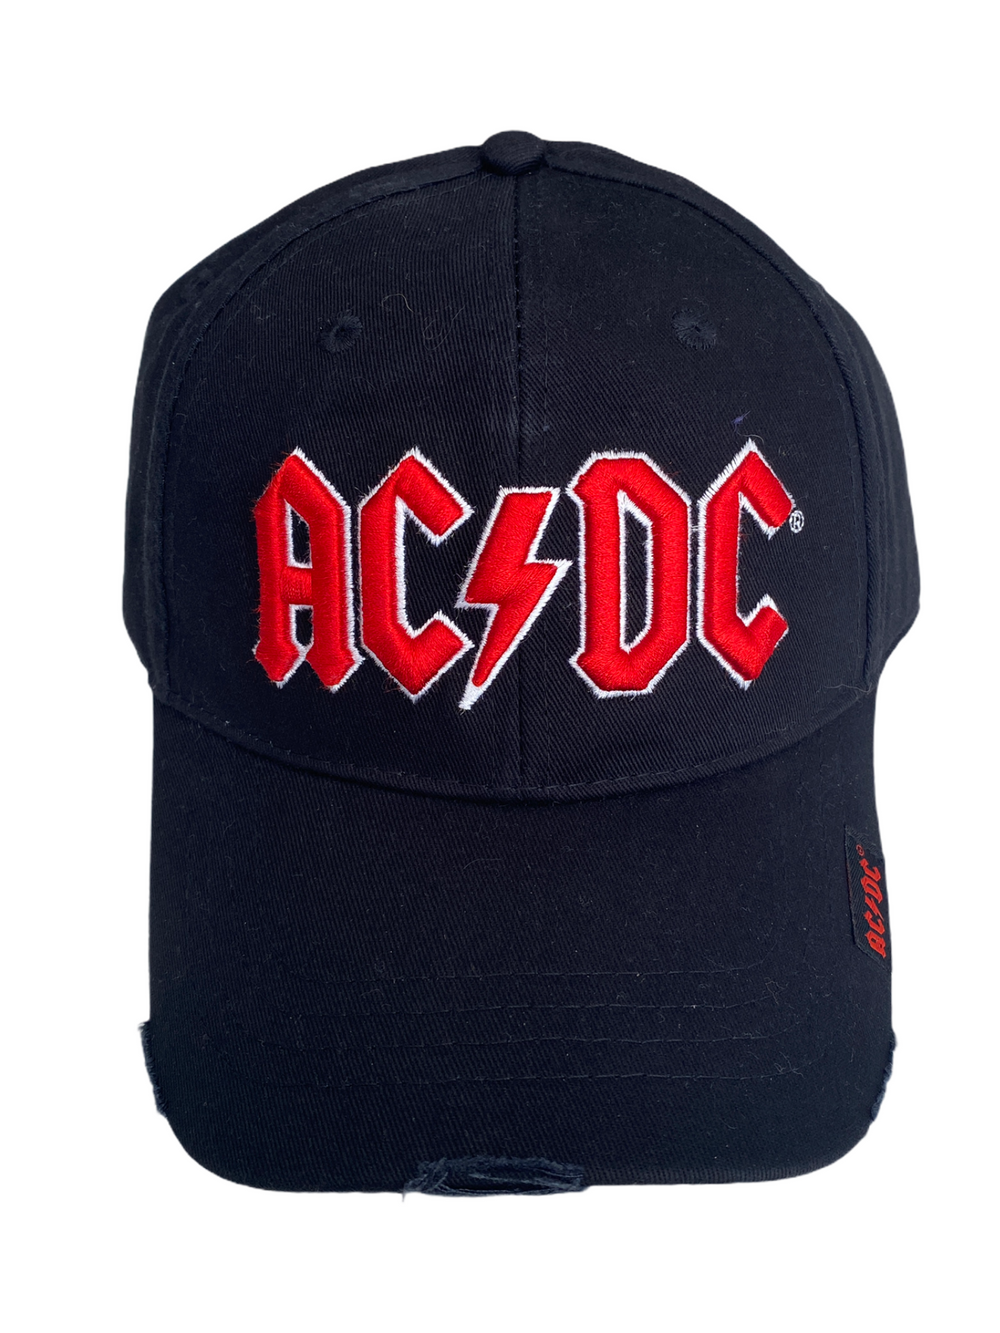 AC/DC Red Logo Cap Official Embroidered Peak Cap Adjustable Brand New